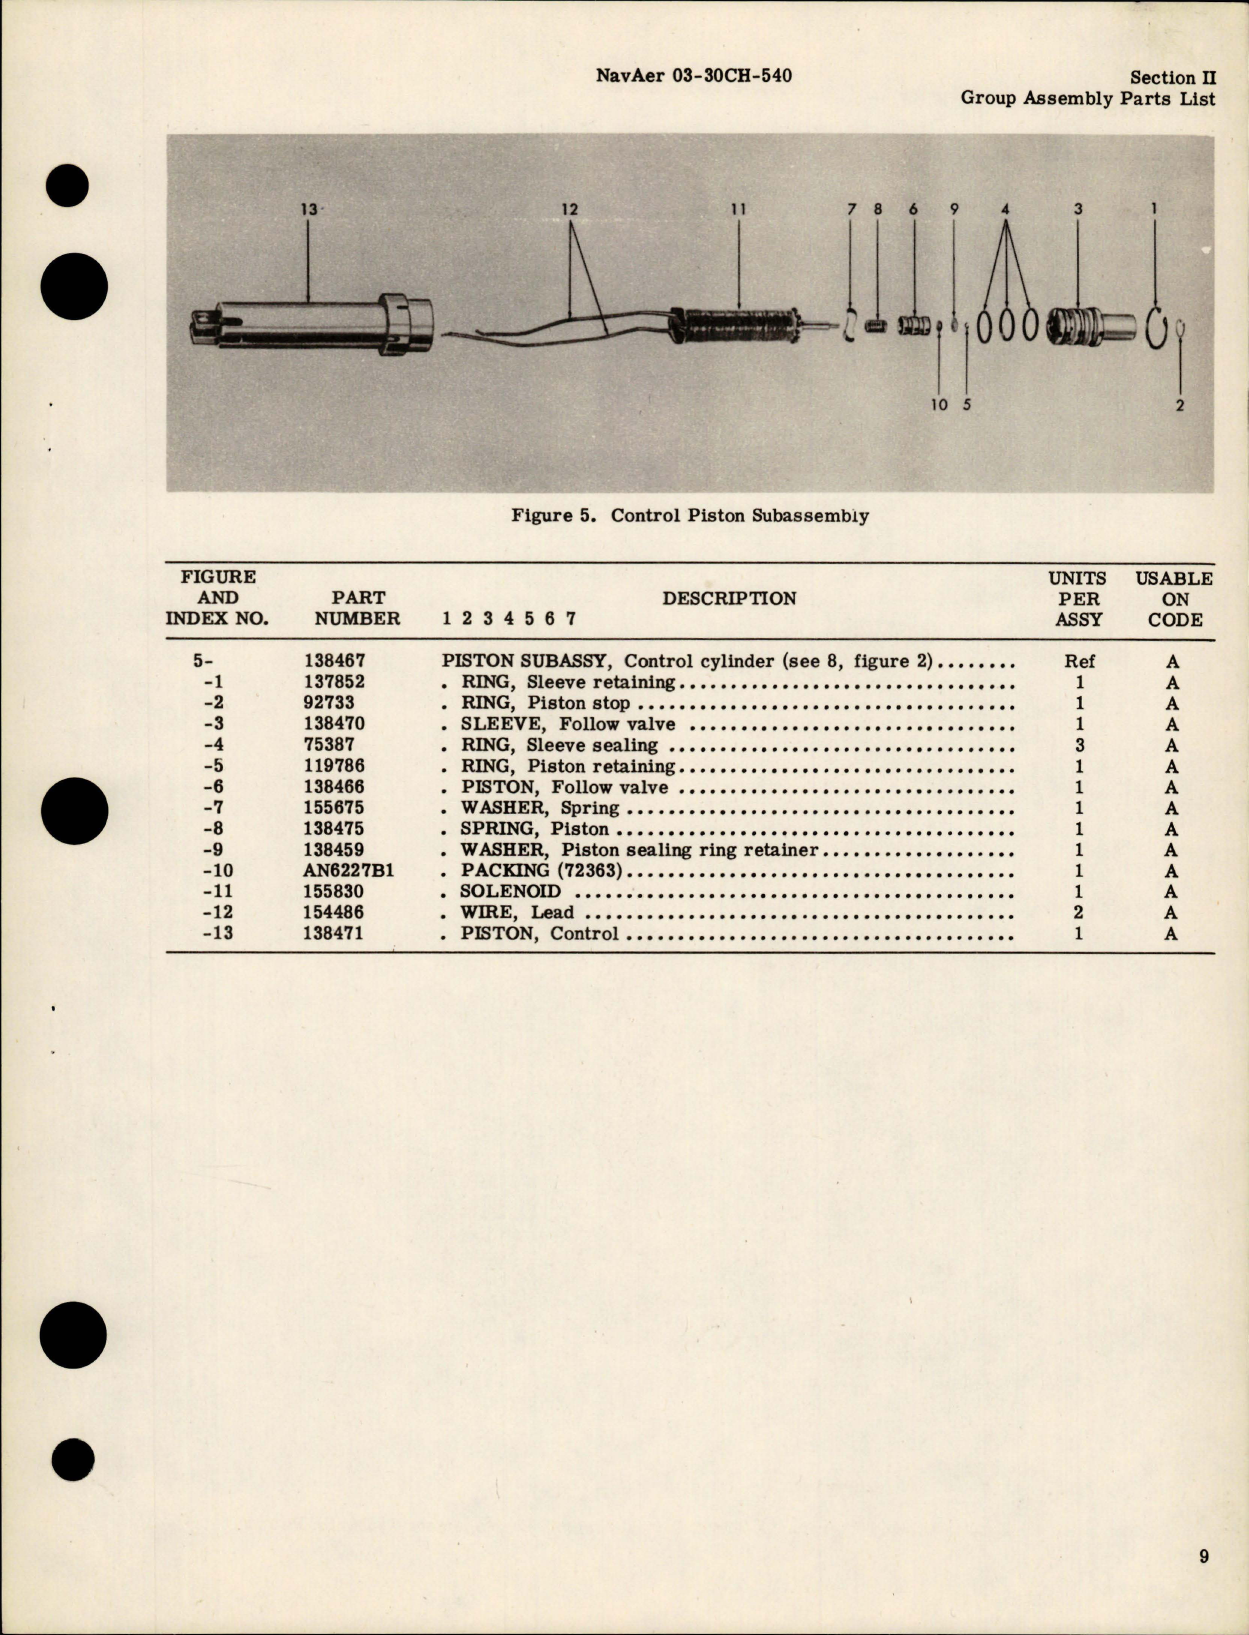 Sample page 7 from AirCorps Library document: Illustrated Parts Breakdown for Variable Displacement Hydraulic Pump Assembly - AA-32670 Series 